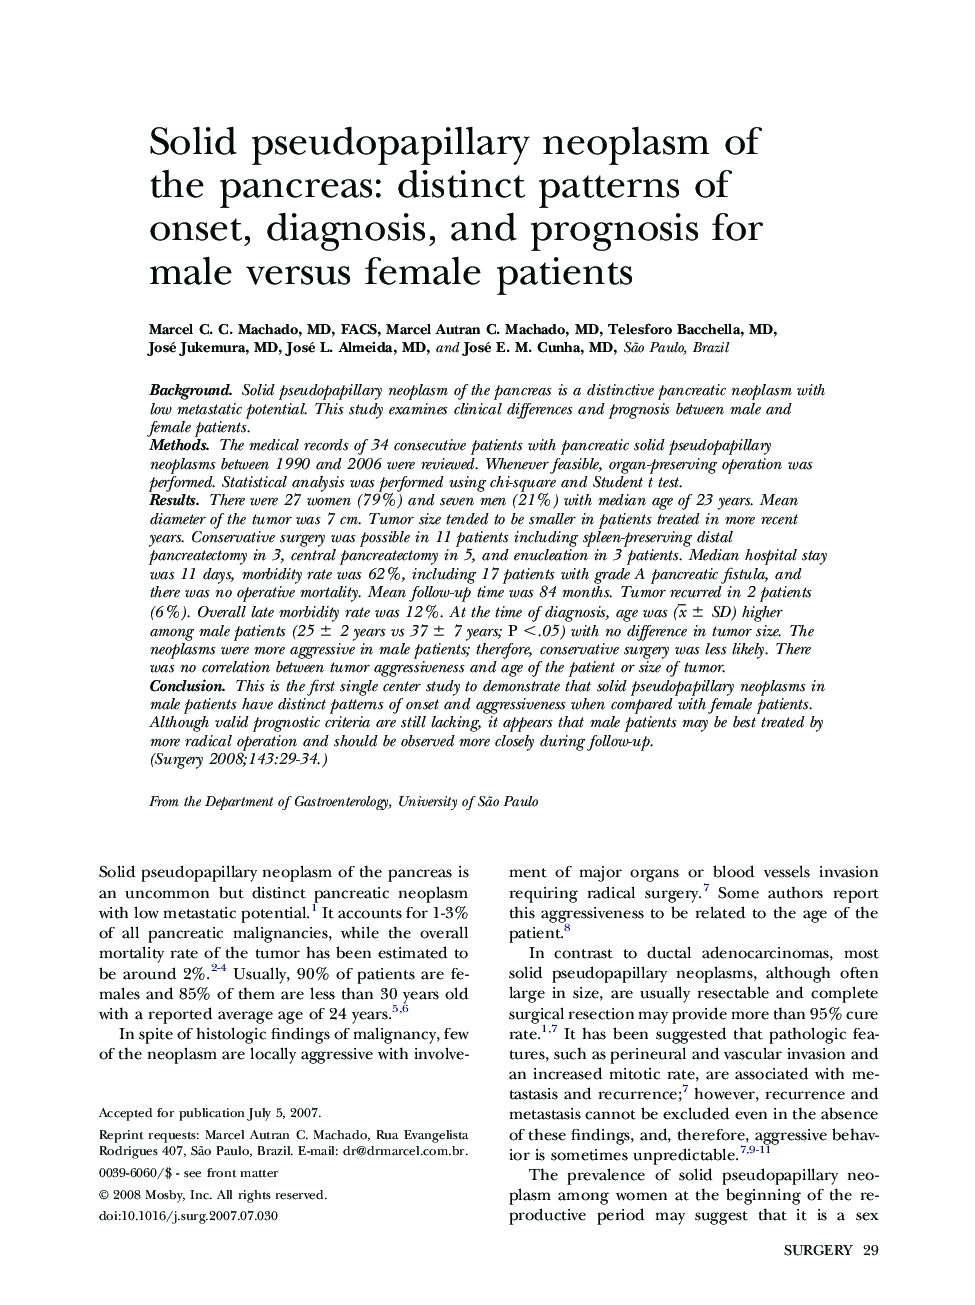 Solid pseudopapillary neoplasm of the pancreas: distinct patterns of onset, diagnosis, and prognosis for male versus female patients